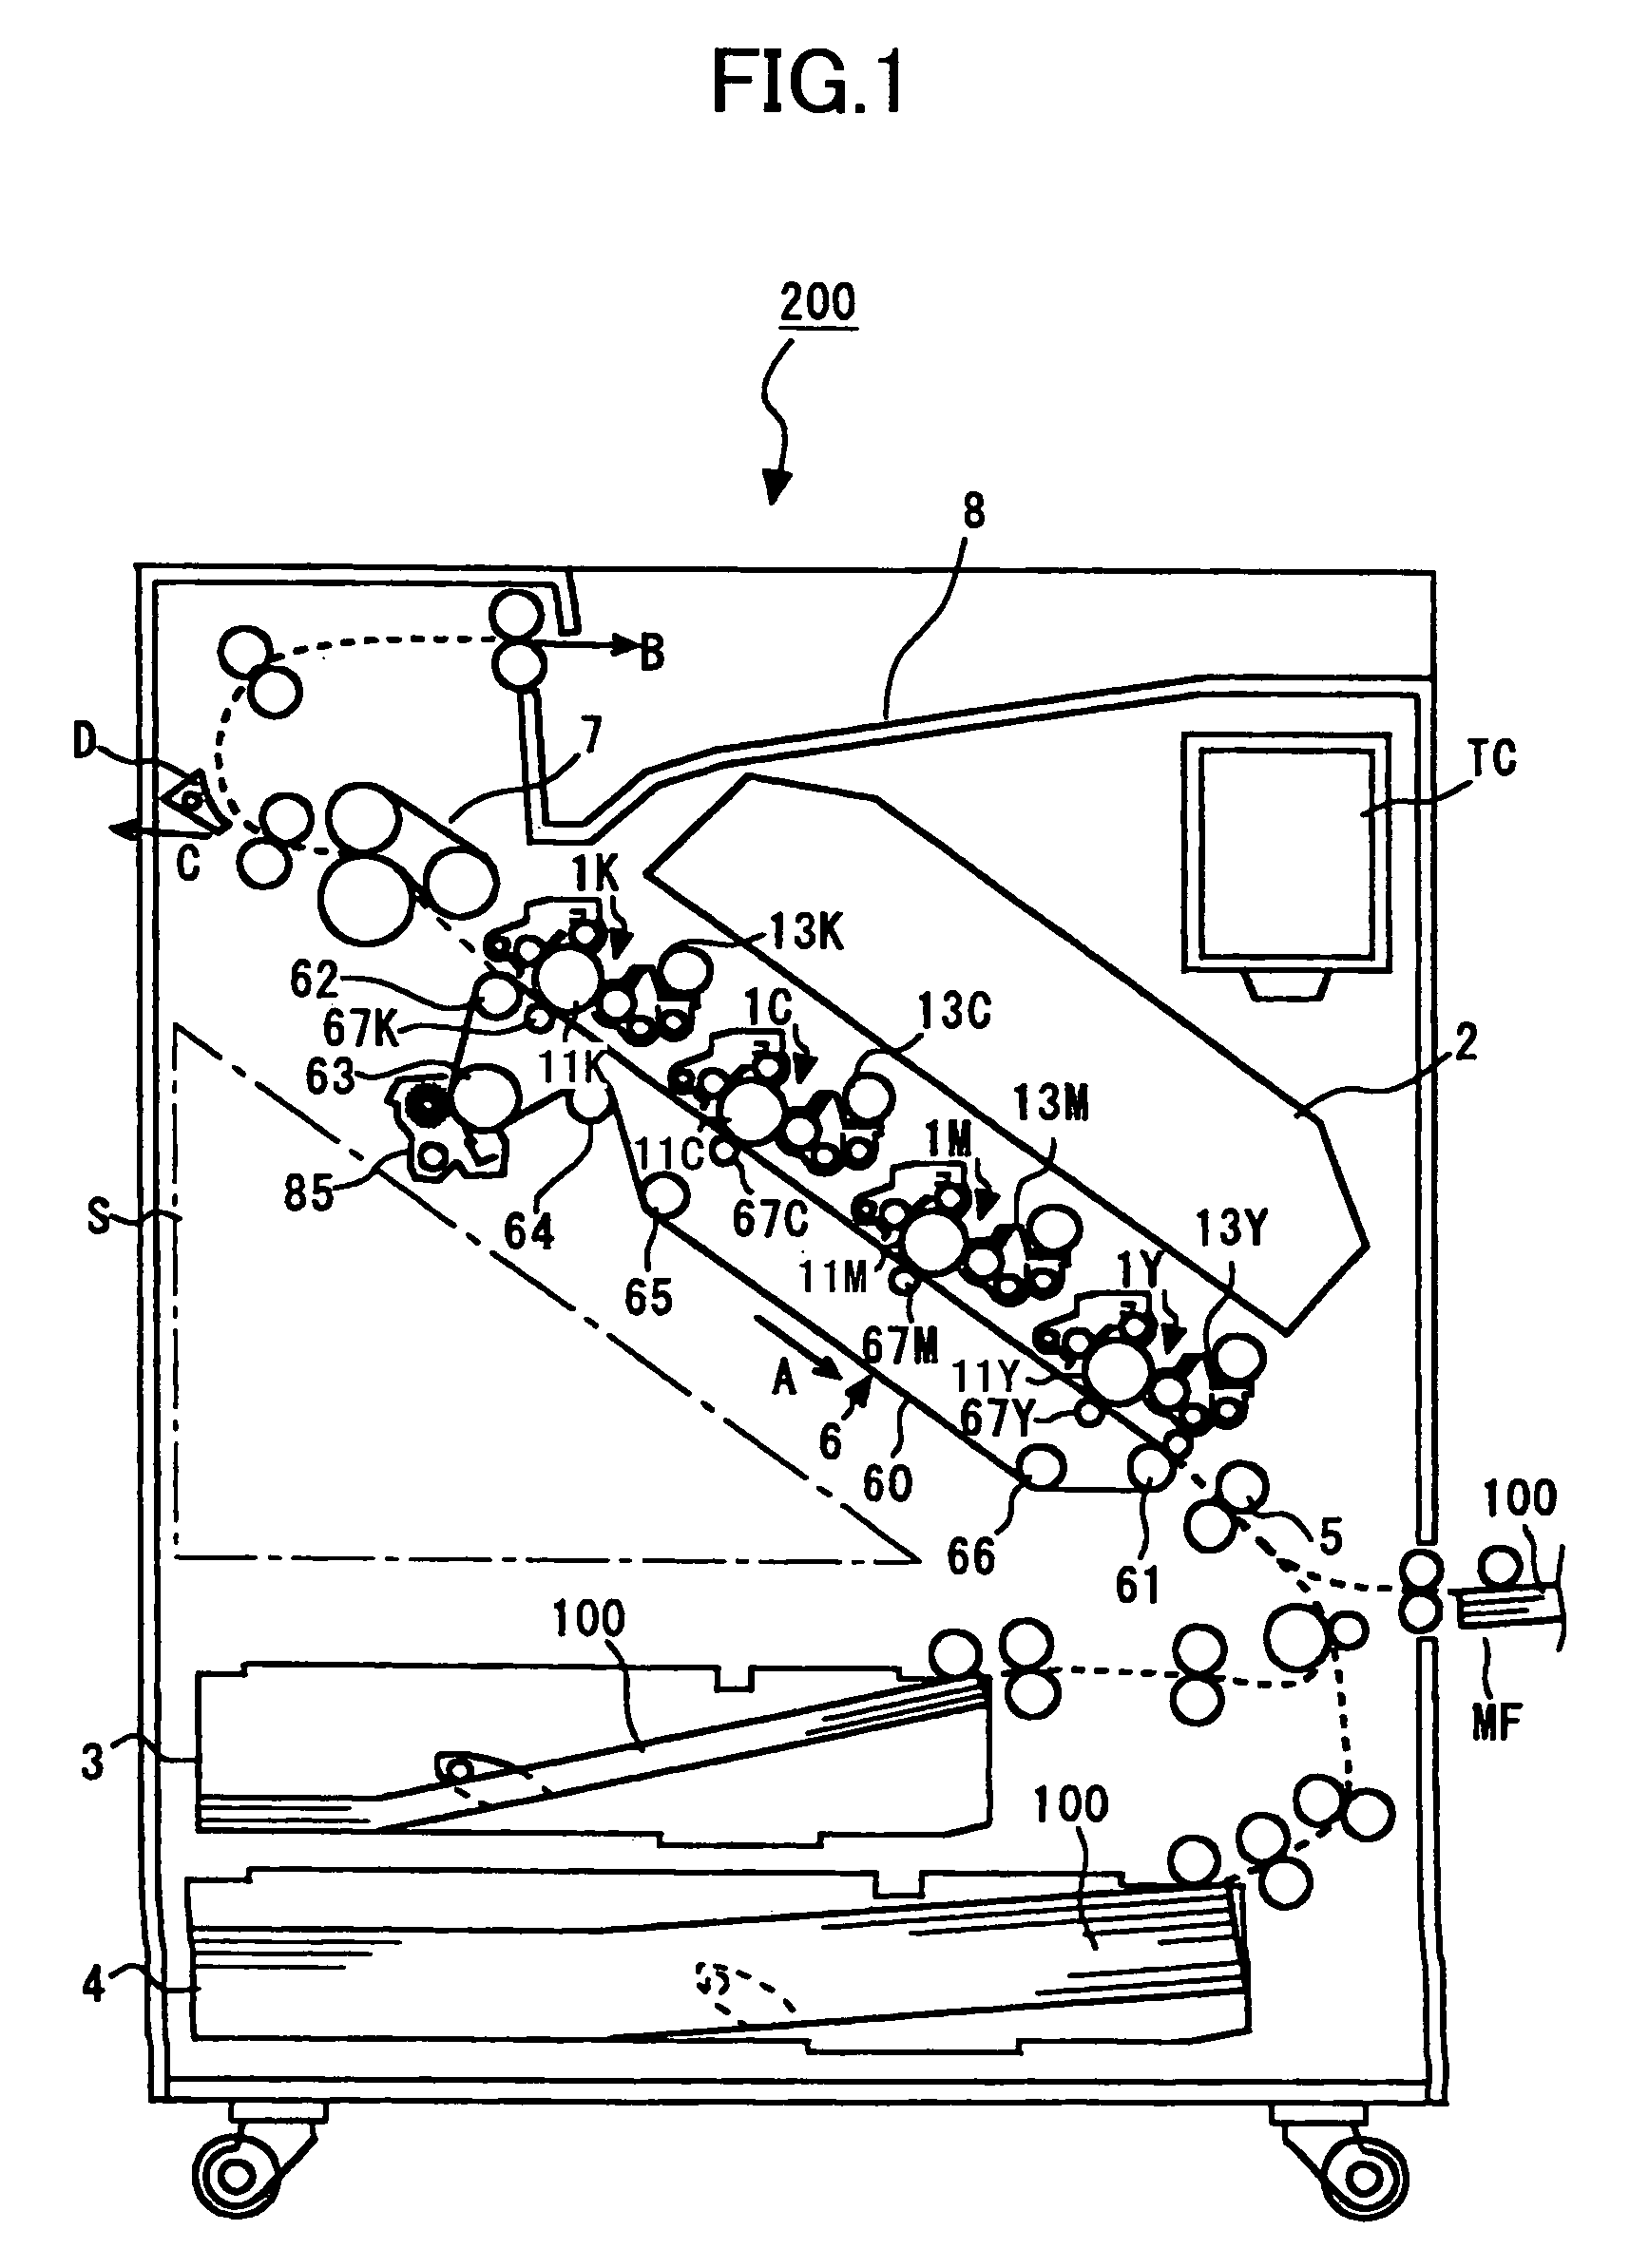 Imaging apparatus, and toner and process cartridge used in the imaging apparatus